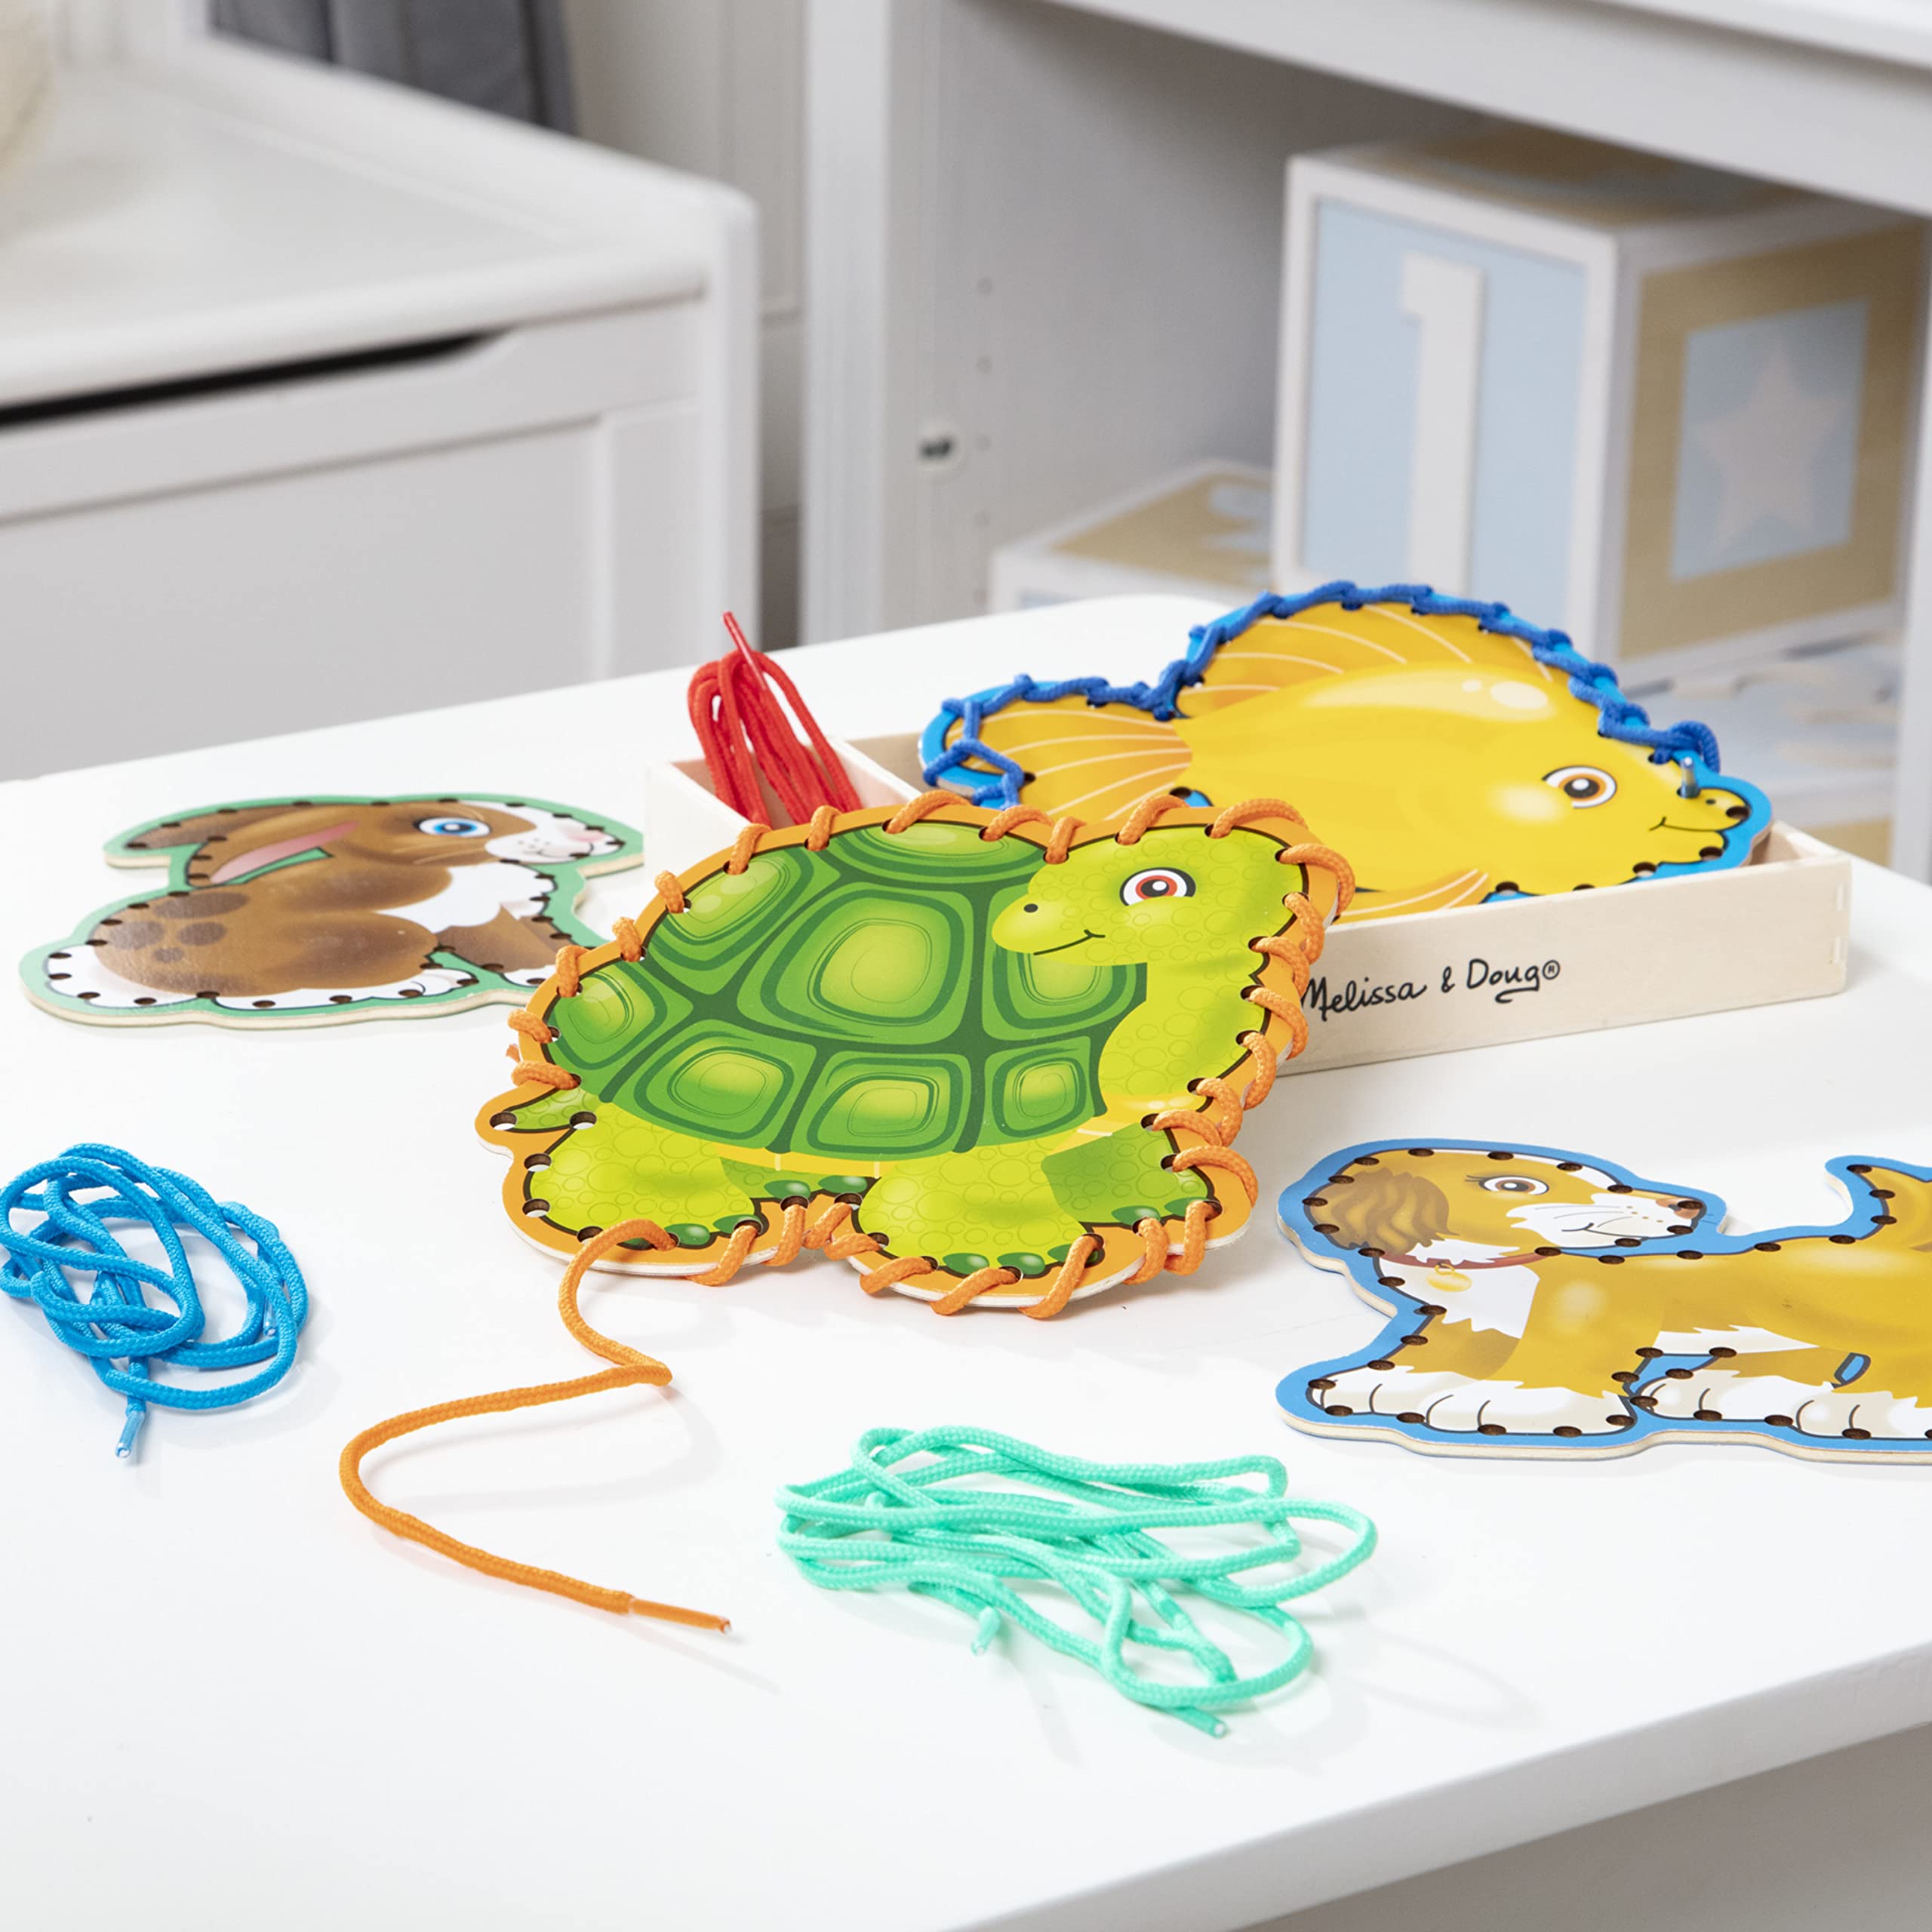 Melissa & Doug Lace and Trace Activity Set: Pets - 5 Wooden Panels and 5 Matching Laces - Lacing Toys For Toddlers, Fine Motor Skills Threading Cards For Preschoolers And Kids Ages 3+